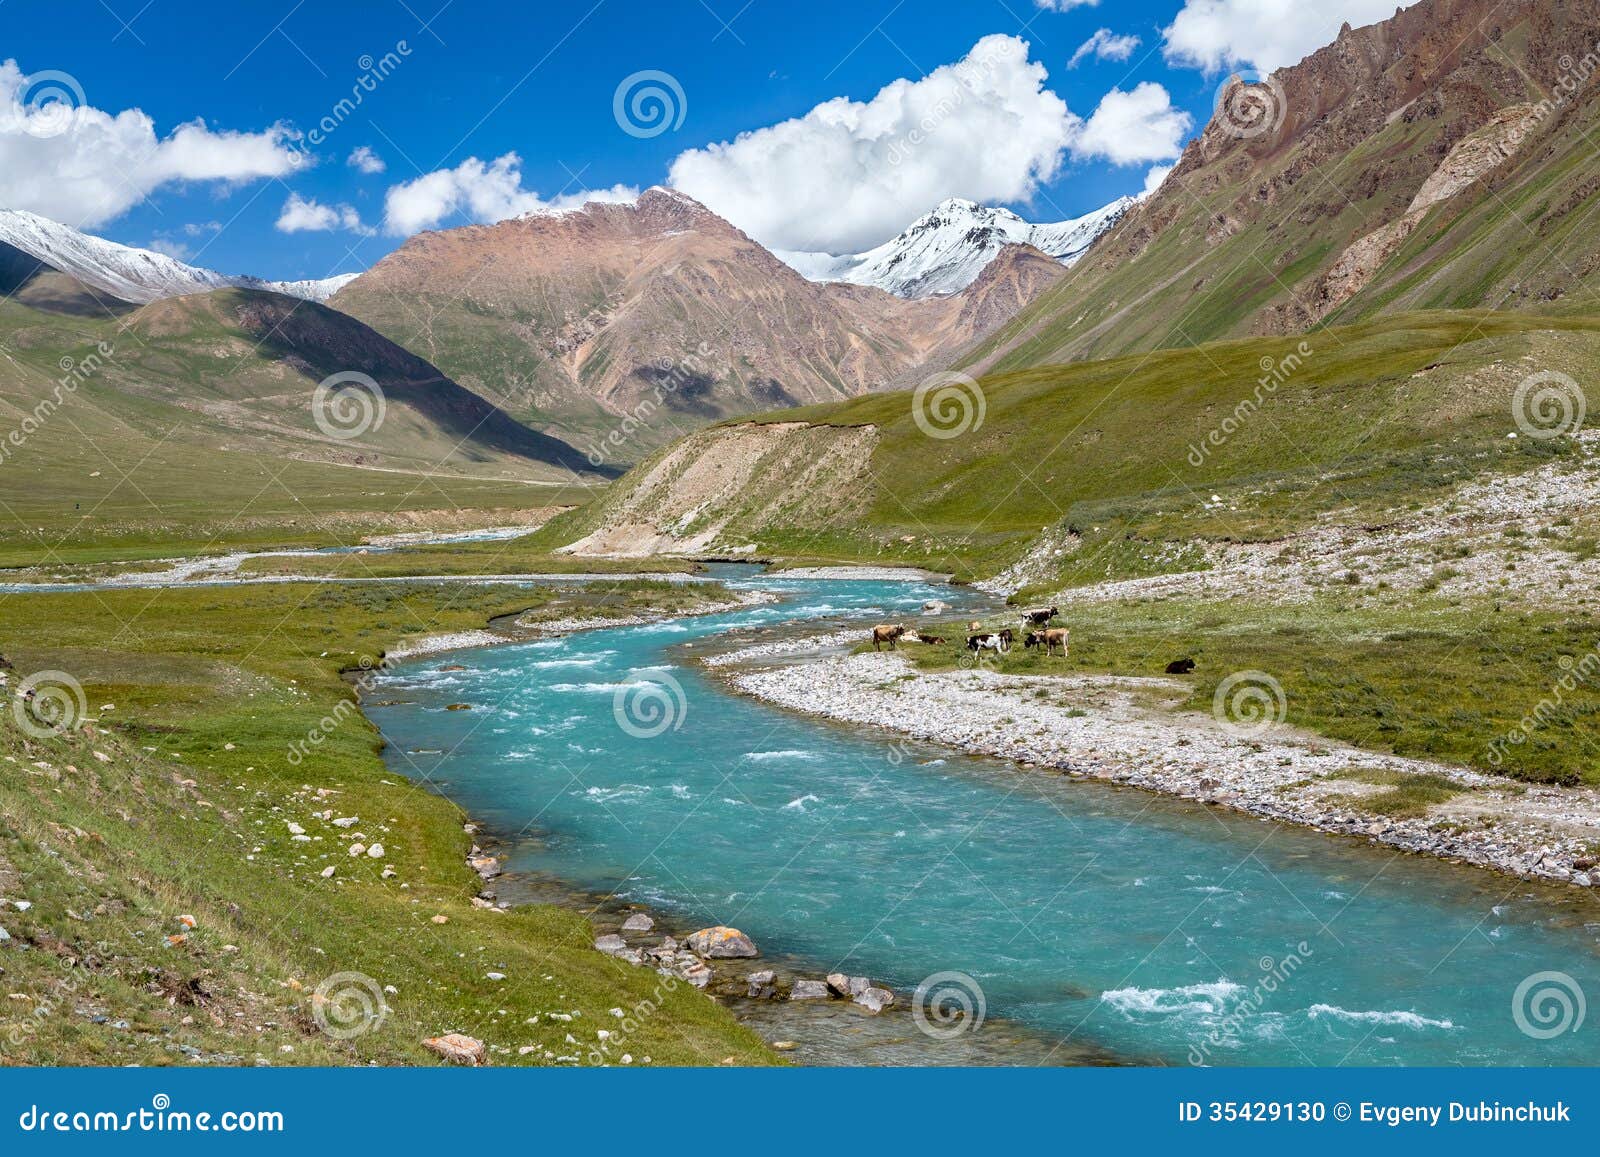 cows pasturing near turquoise river, tien shan